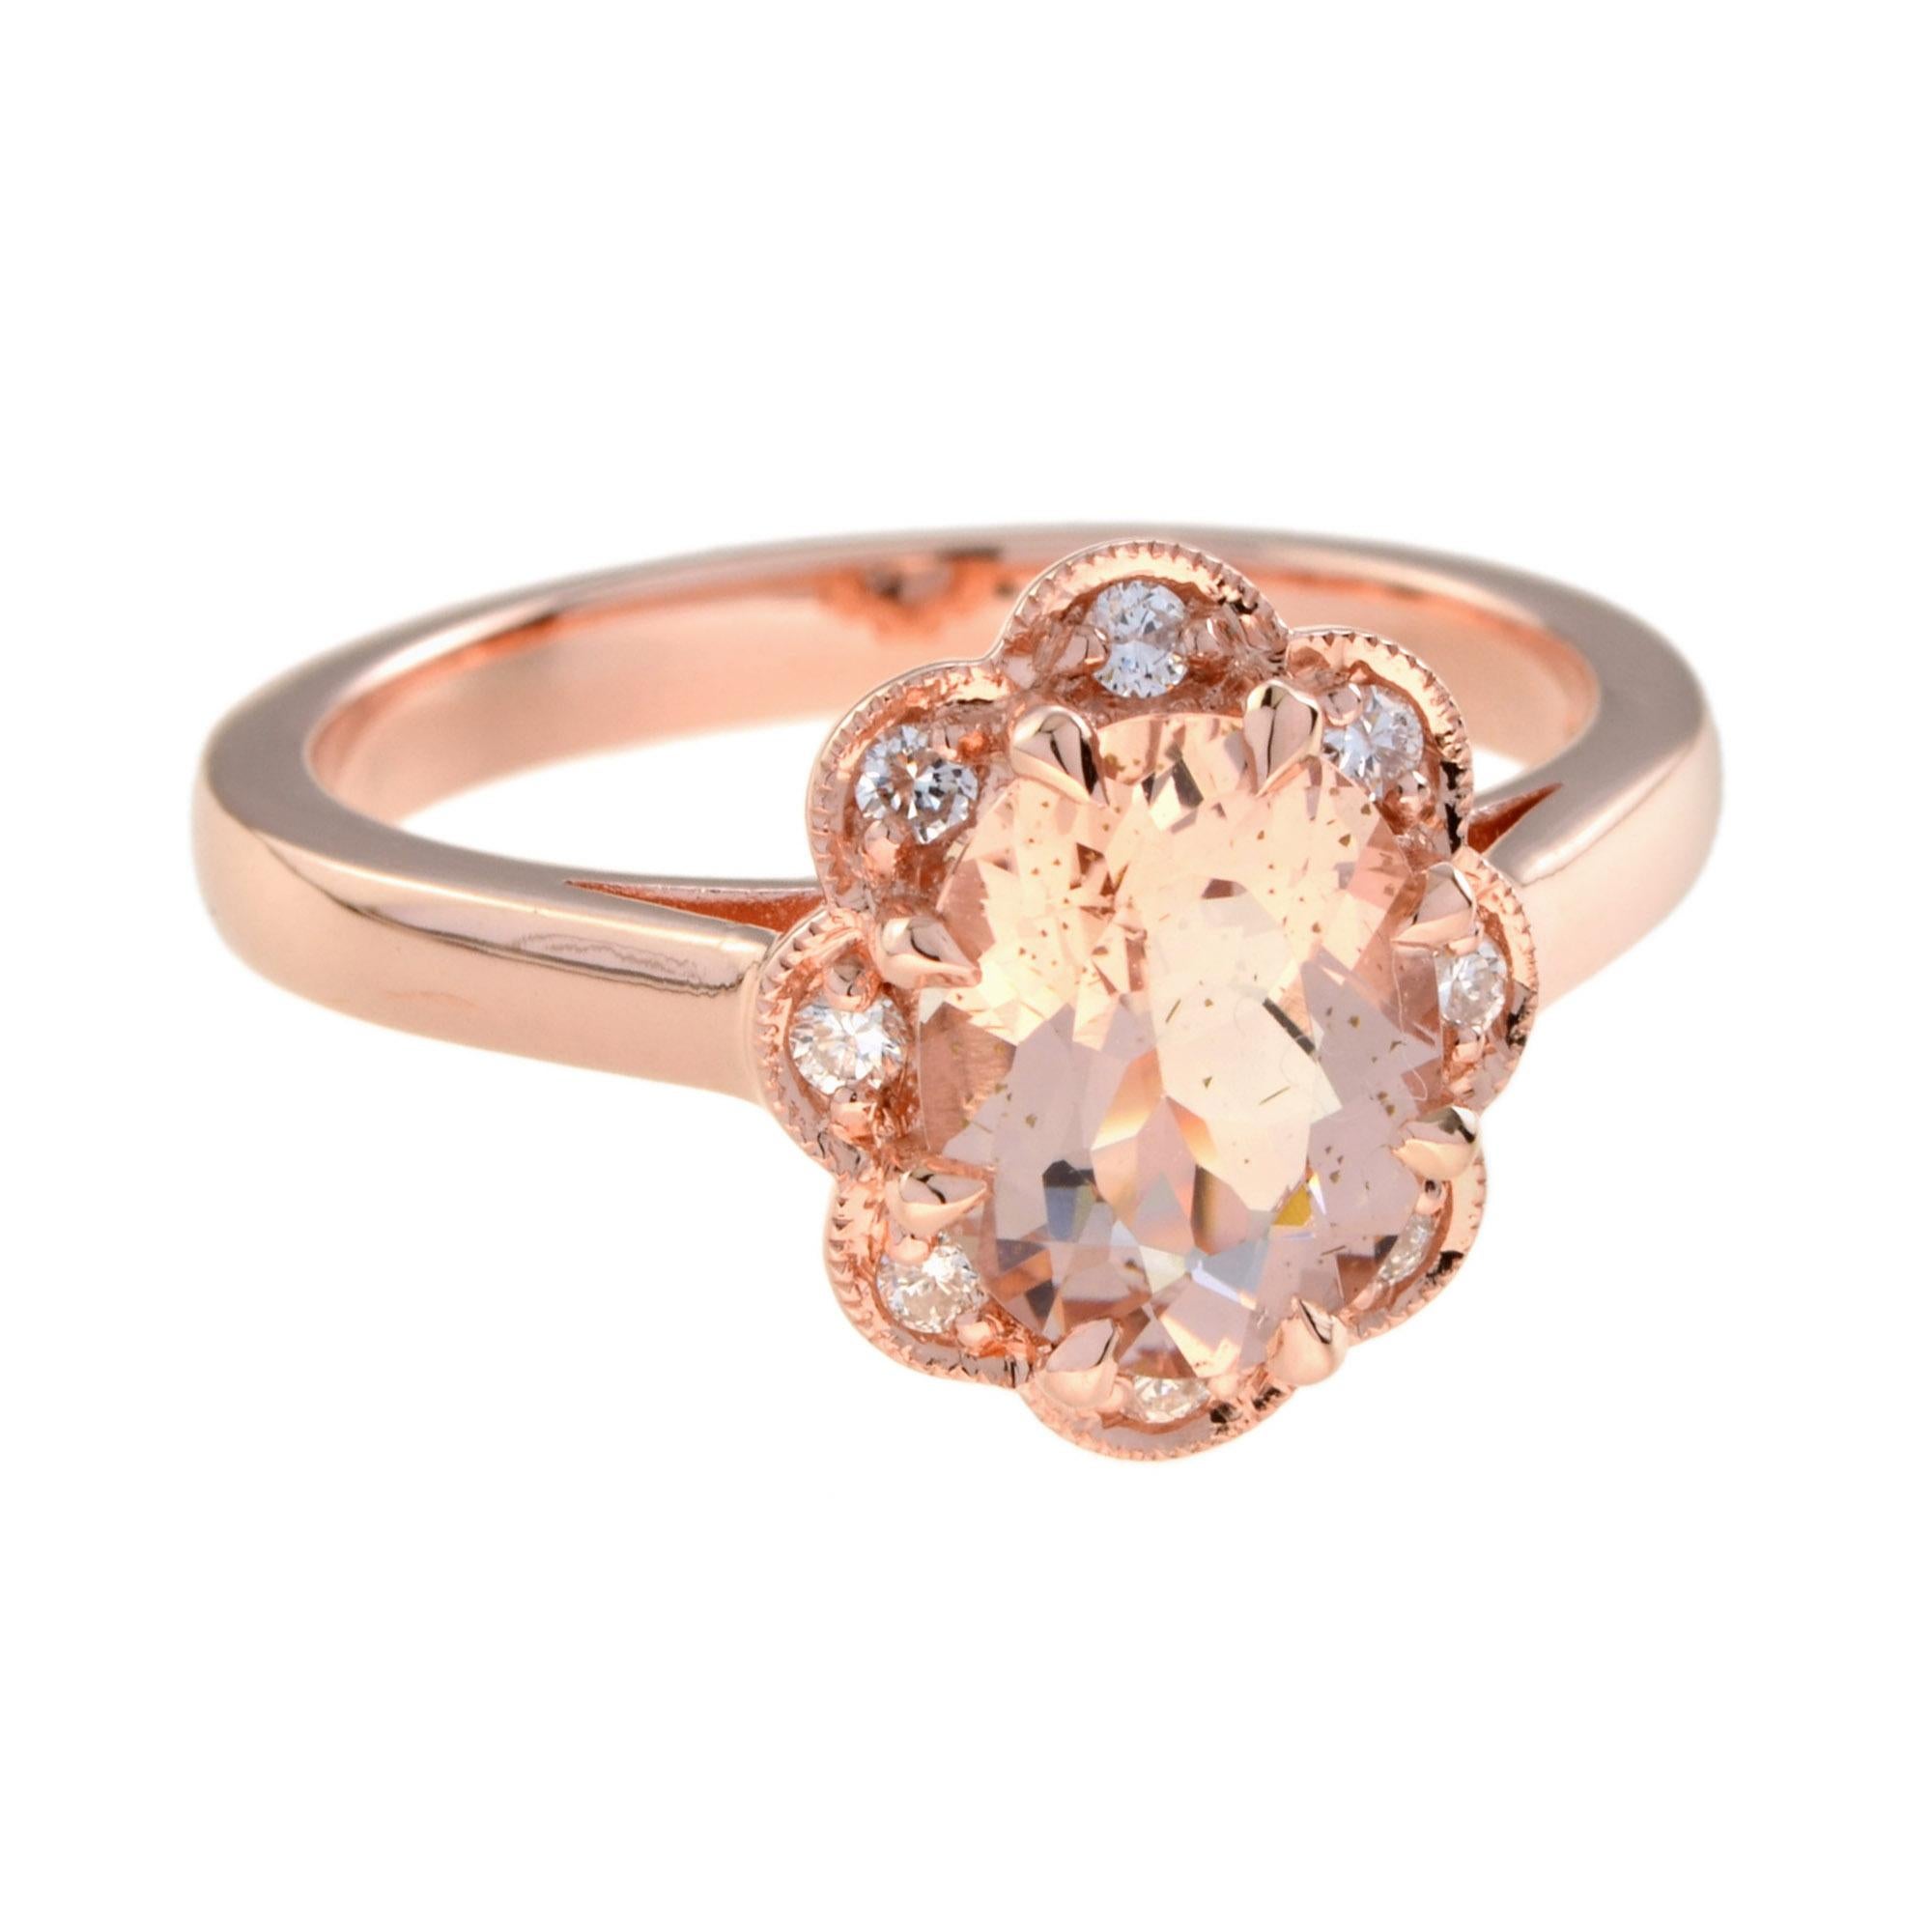 A fabulous 1.8 carat oval morganite immediately catches the eye, sitting at the center of the cluster surrounded by eight diamonds. Adorn yourself with this sweet color jewelry.

Ring Information
Style: Vintage
Metal: 9K Rose Gold
Total weight: 4.03